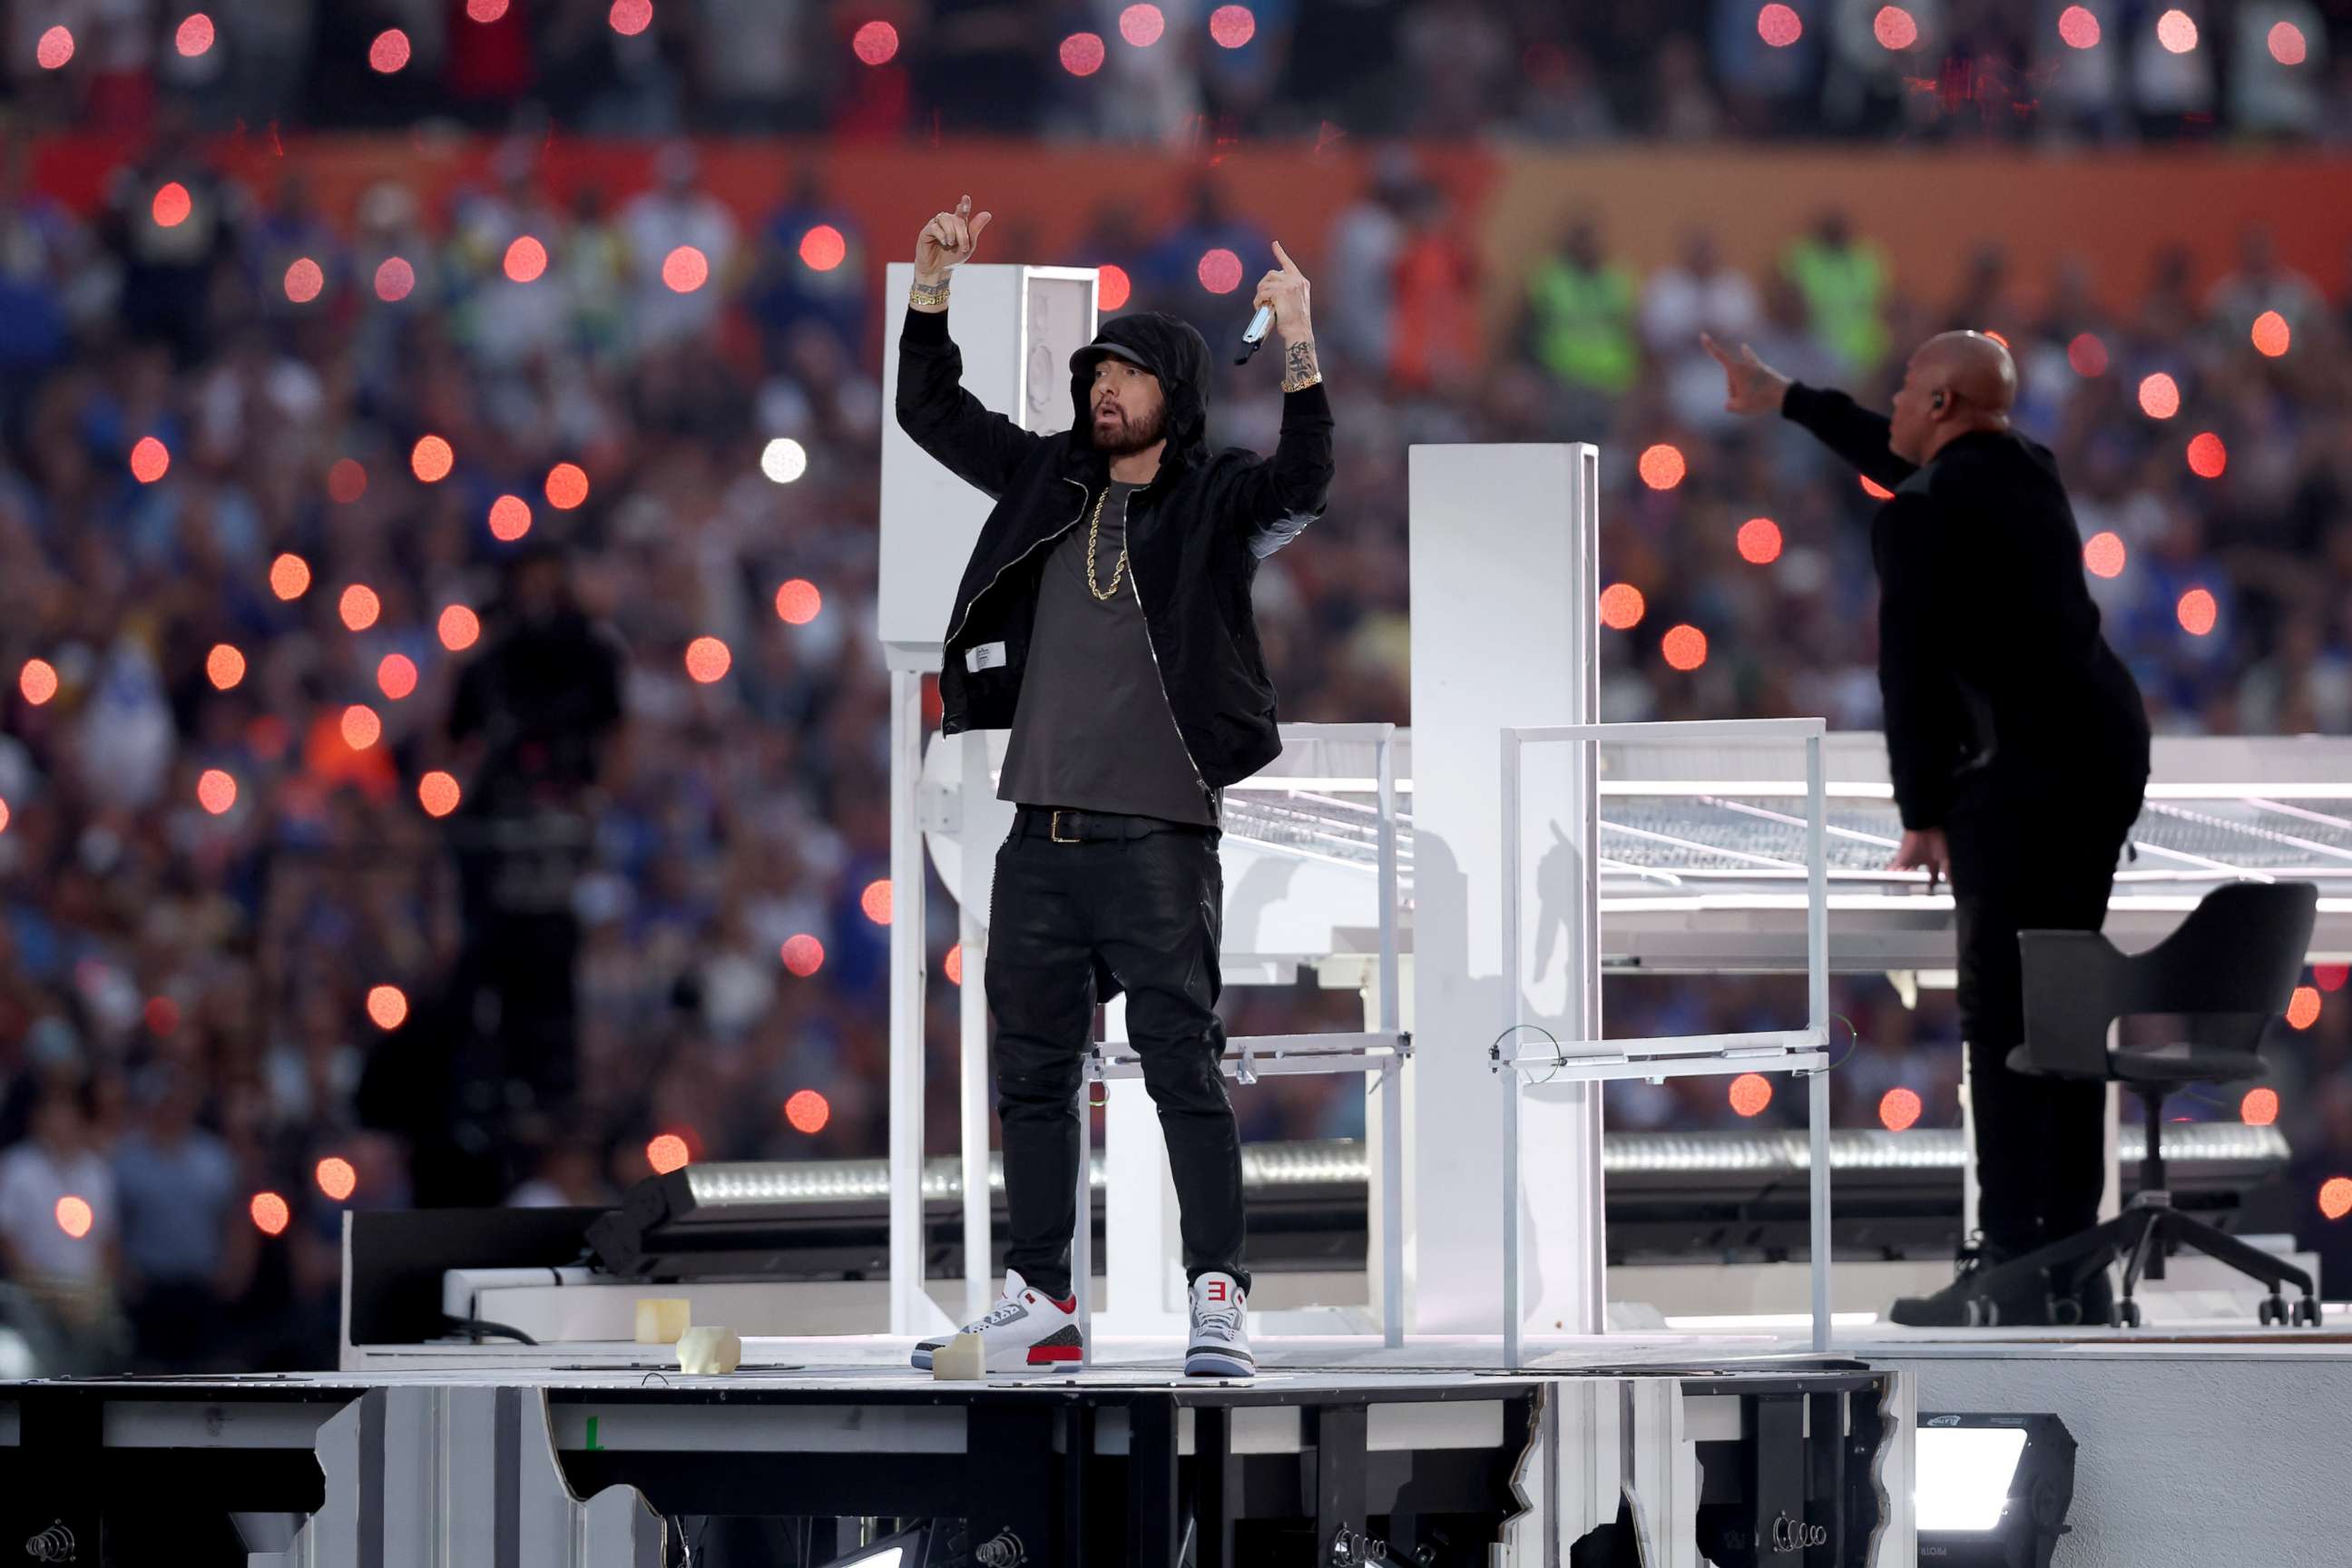 Super Bowl Halftime Show In 2022 To Feature Dre, Snoop, Eminem